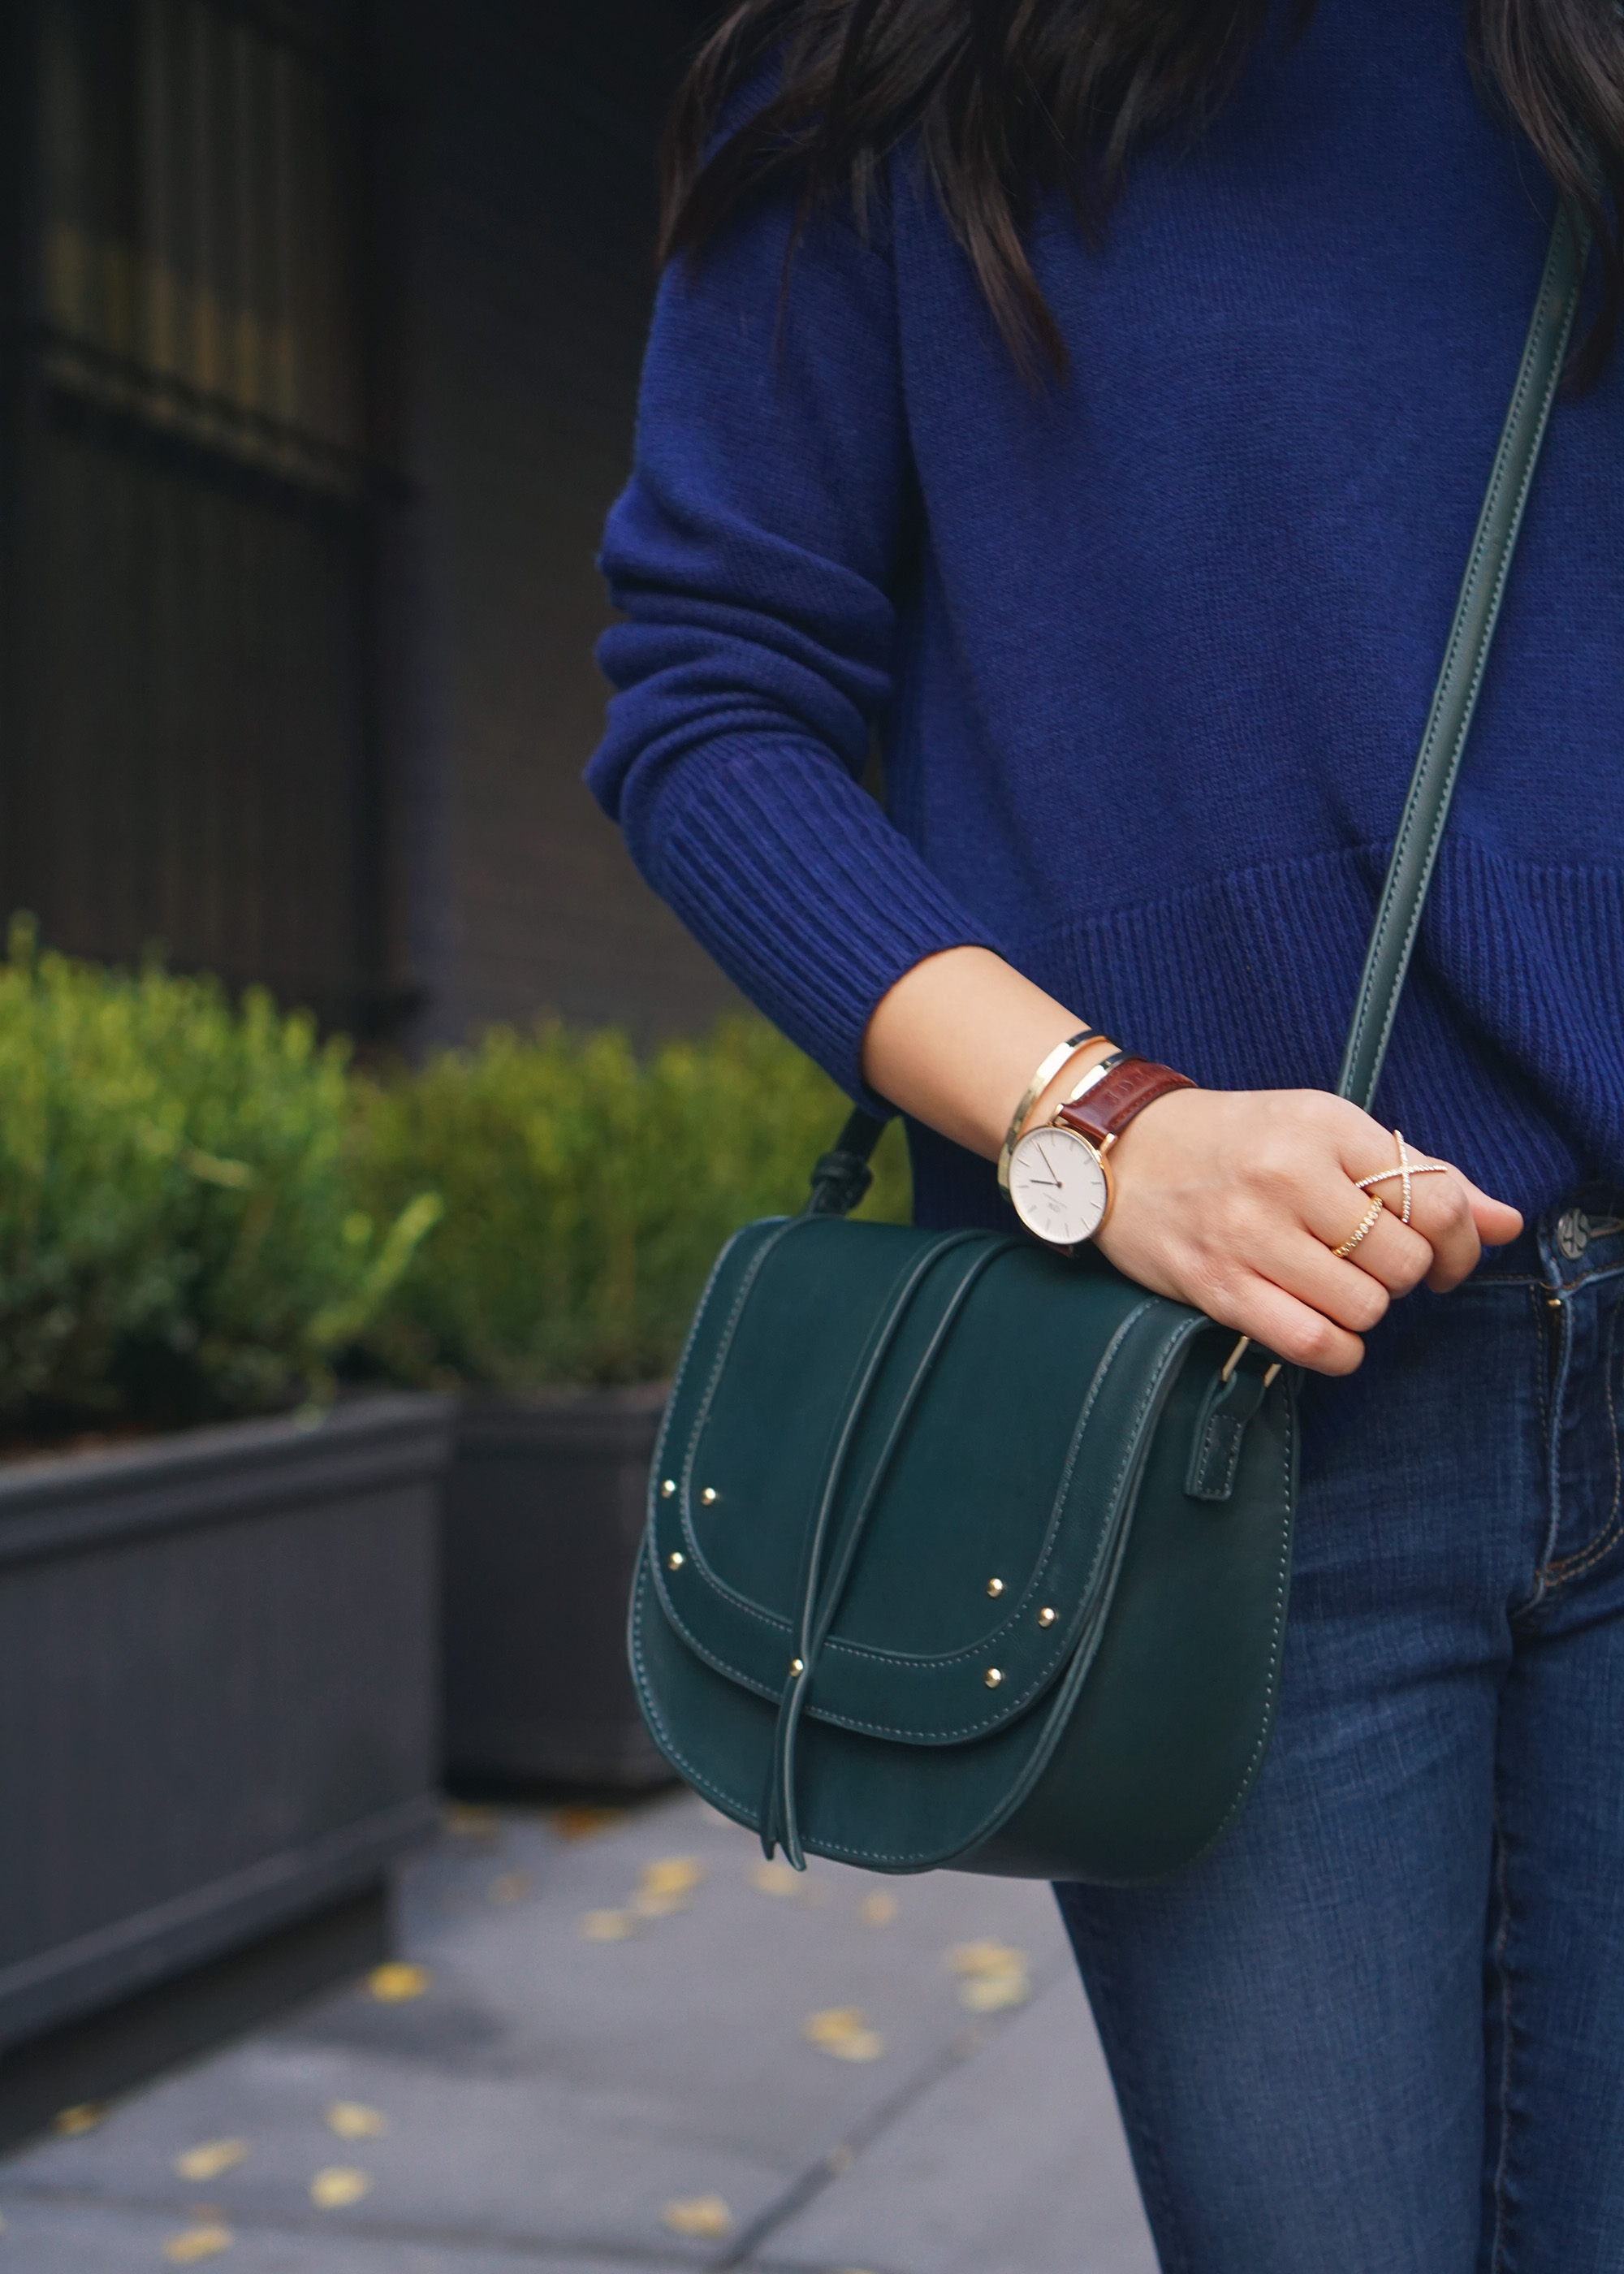 Casual Fall Outfit Idea: Navy Turtleneck & Ripped Jeans